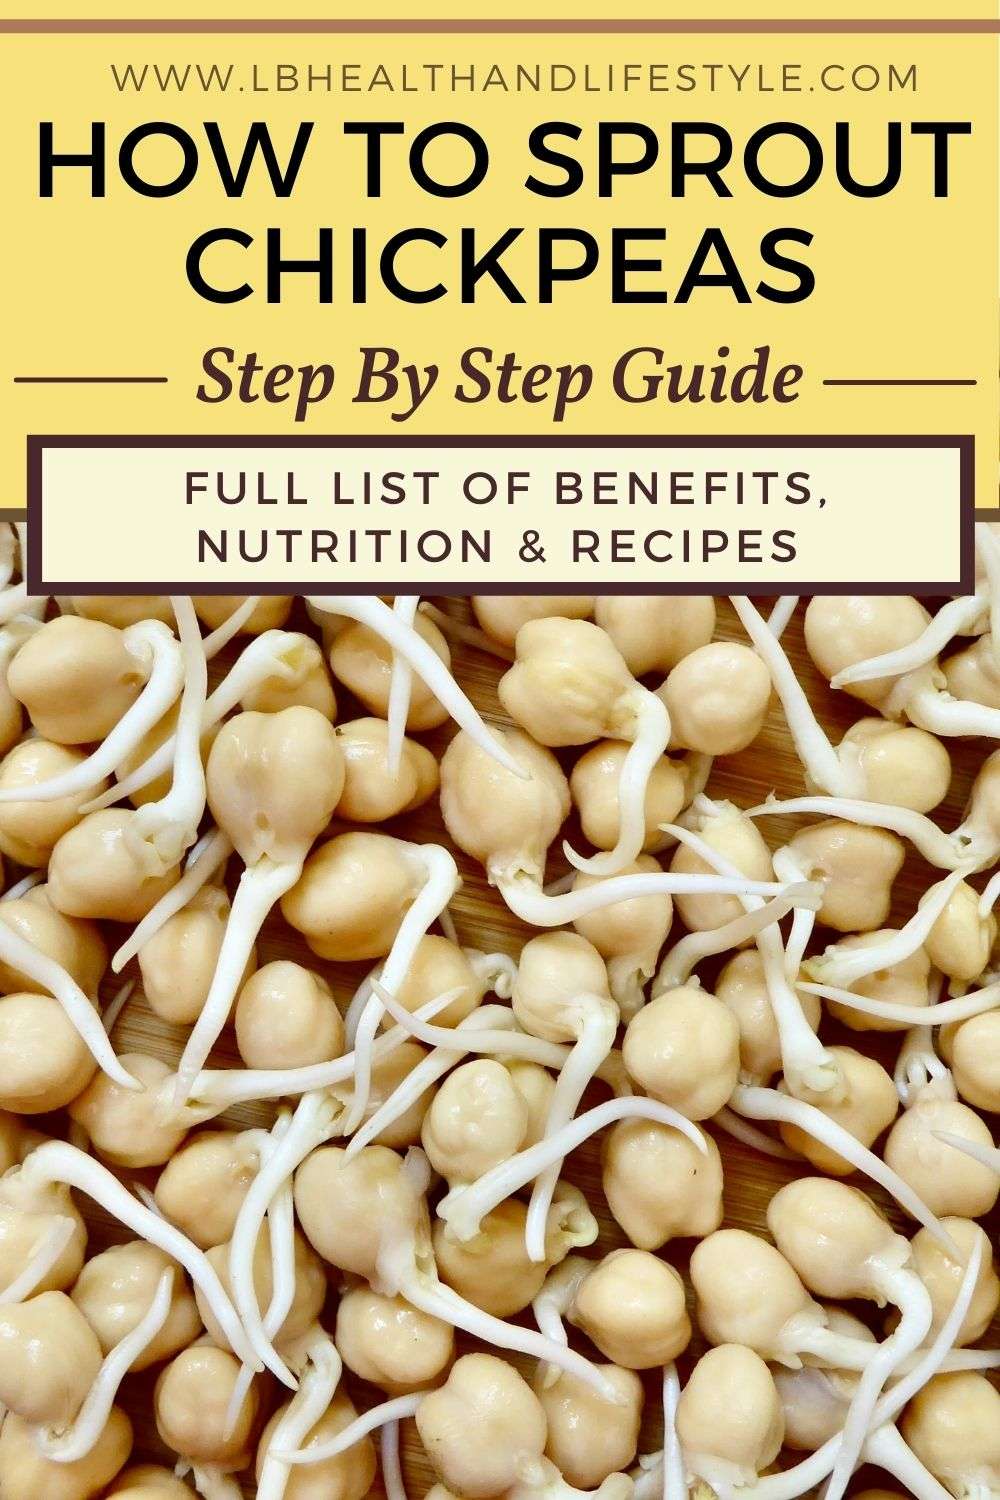 Step by step guide for how to sprout chickpeas. Full list of benefits, nutrition and recipes.